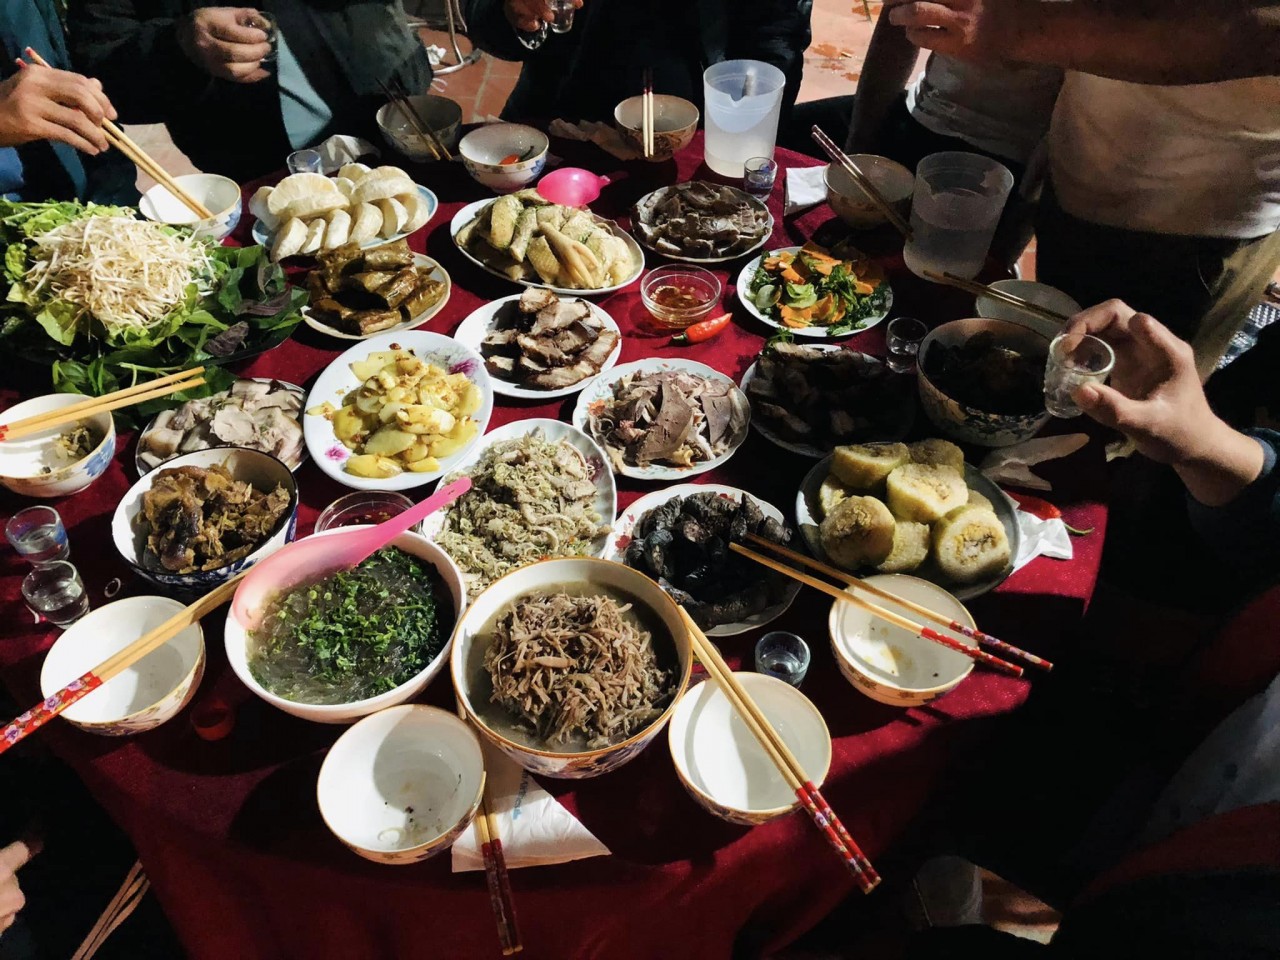 Tet (Lunar New Year) is the time for all family members to get together while enjoying traditional dishes. All these sumptuous feasts and alcohol consumption can make you gain unwanted weight this Lunar New Year.